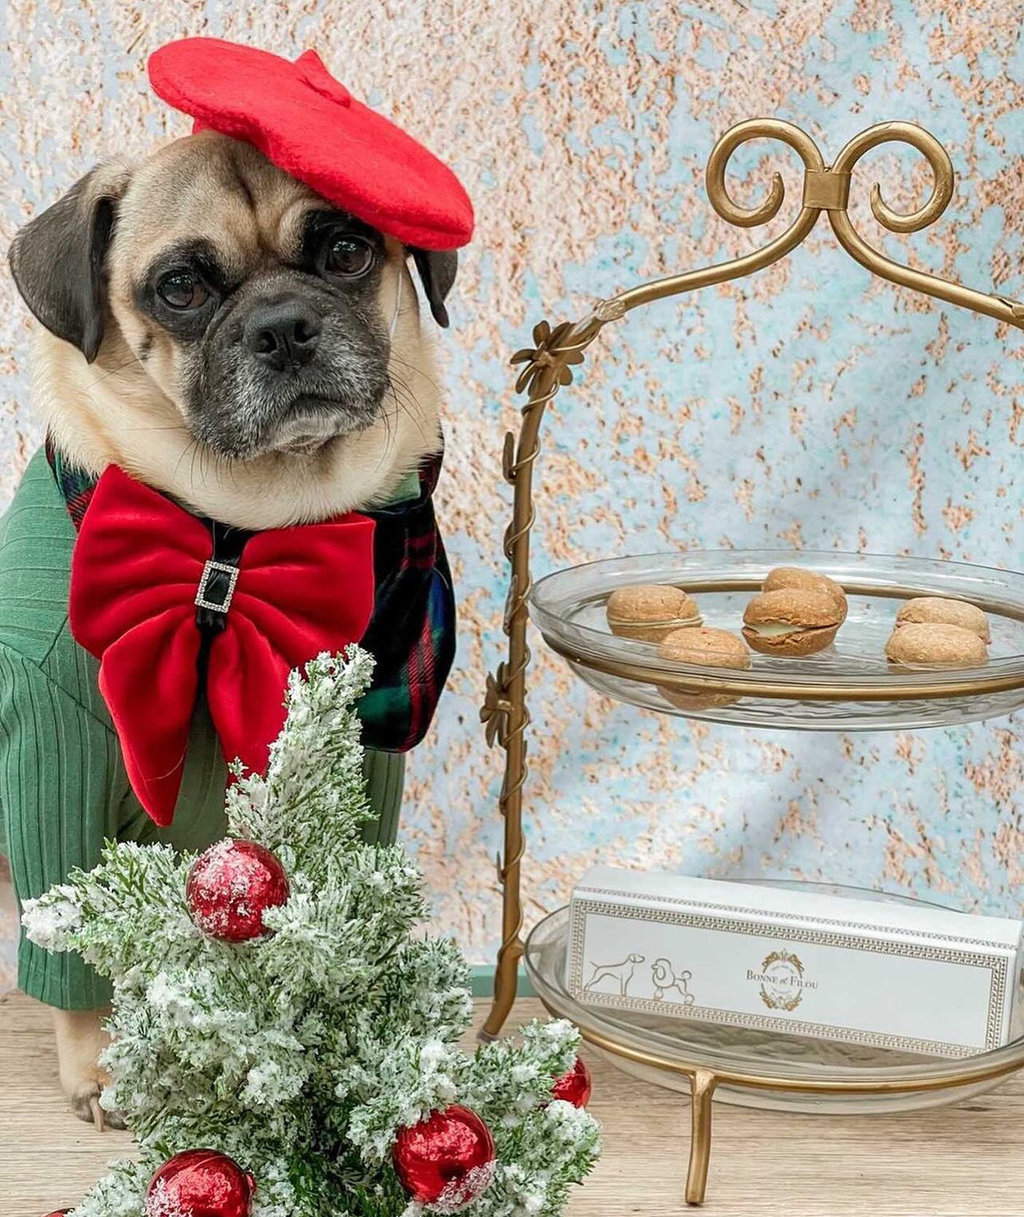 13 Unique Christmas Gifts For Animal Lovers & Their Adorable Furry Friends